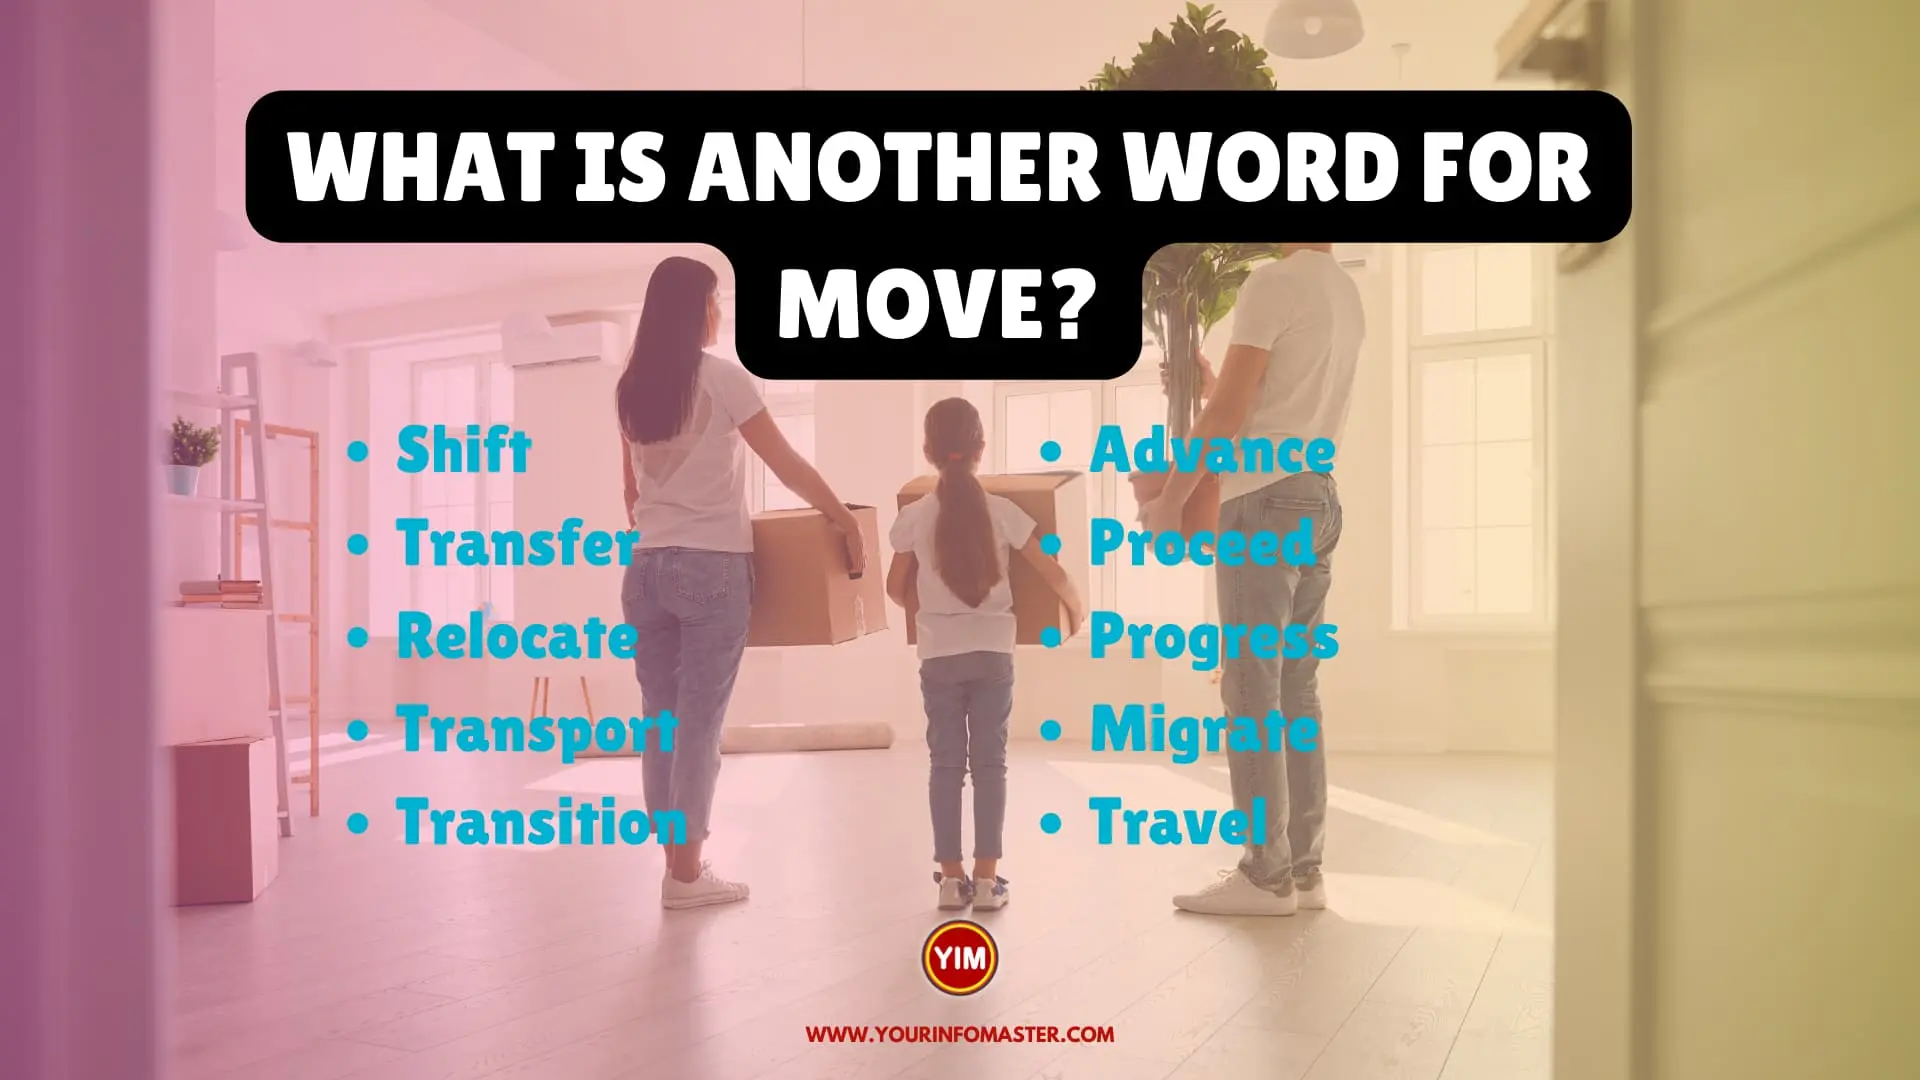 What is another word for Move